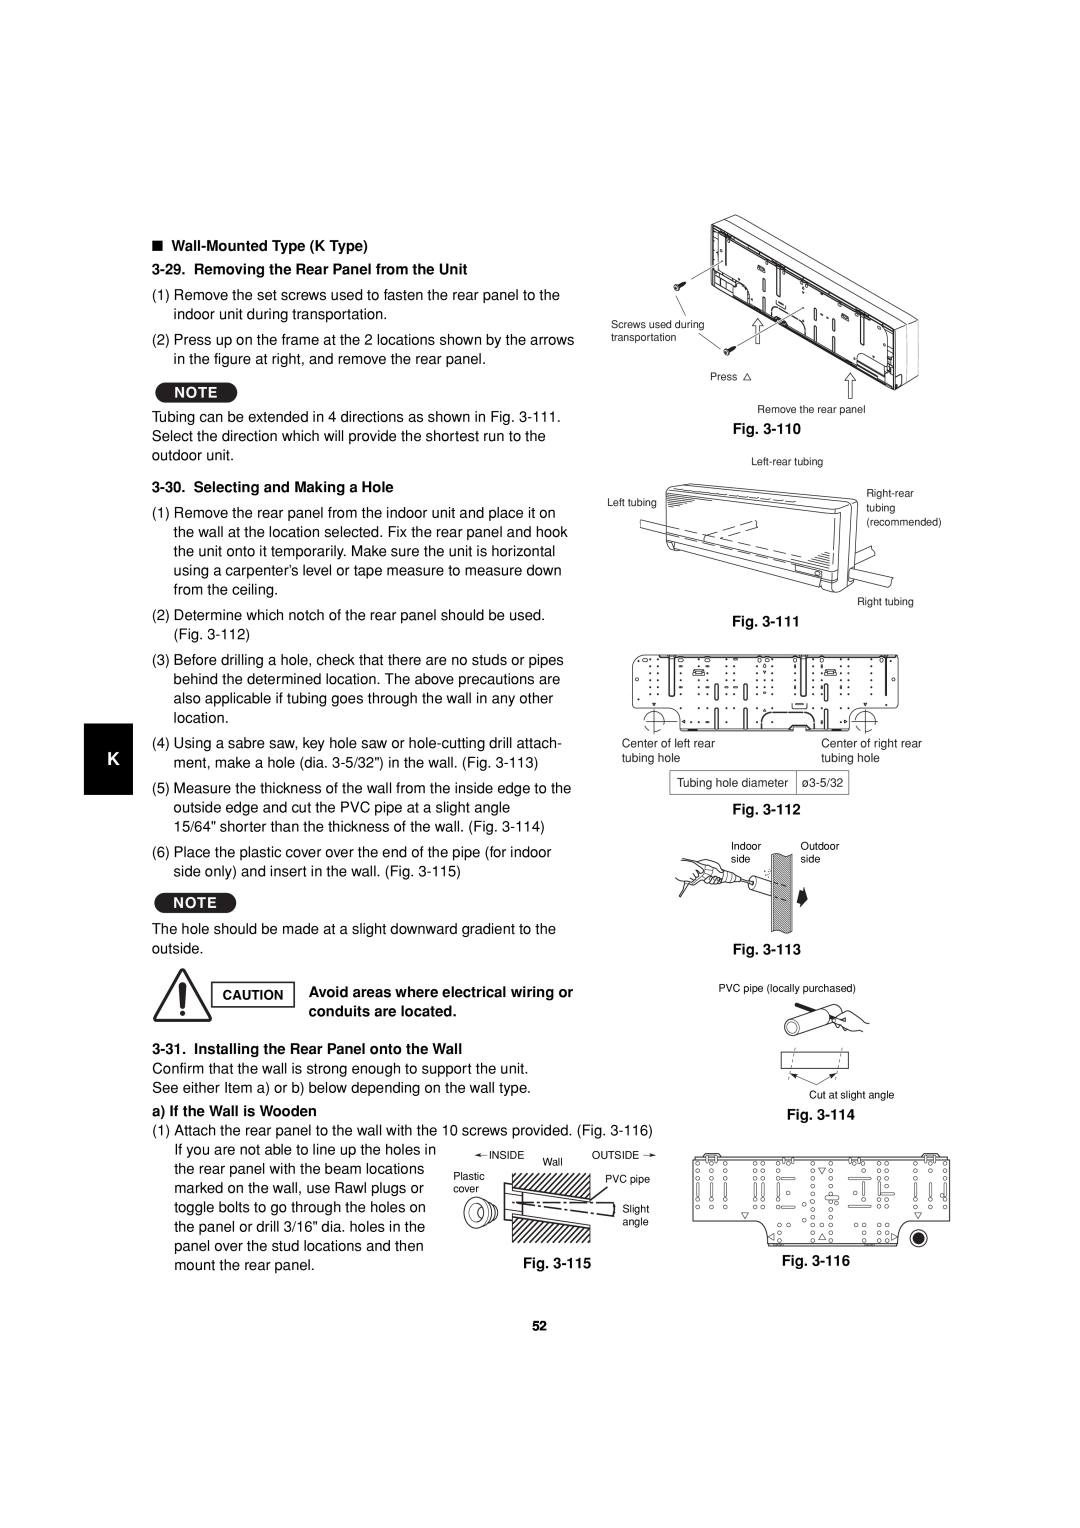 Sanyo 85464359981002 Removing the Rear Panel from the Unit, Selecting and Making a Hole, Fig. Fig, Wall-MountedType K Type 